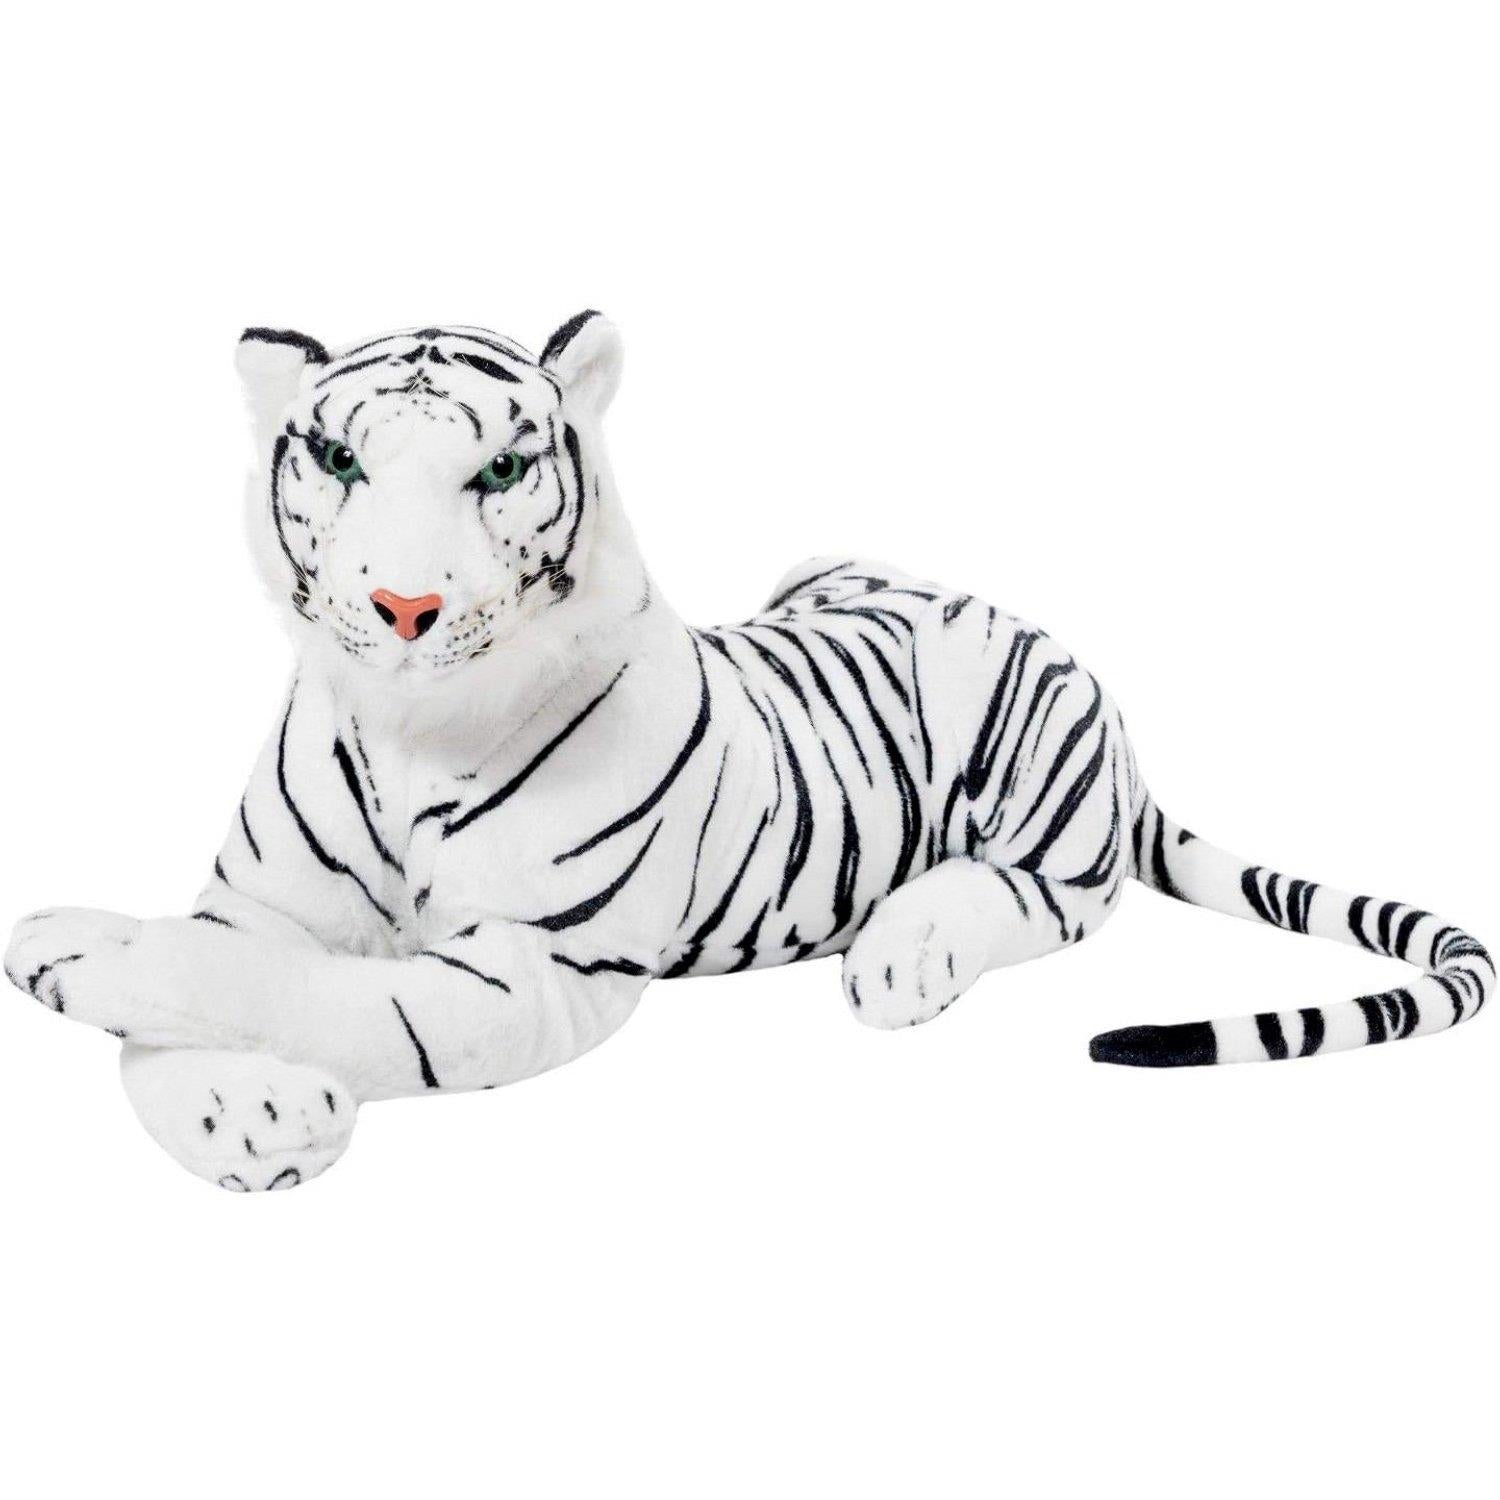 MTS Toys and Games Medium White Tiger Soft Plush Toy